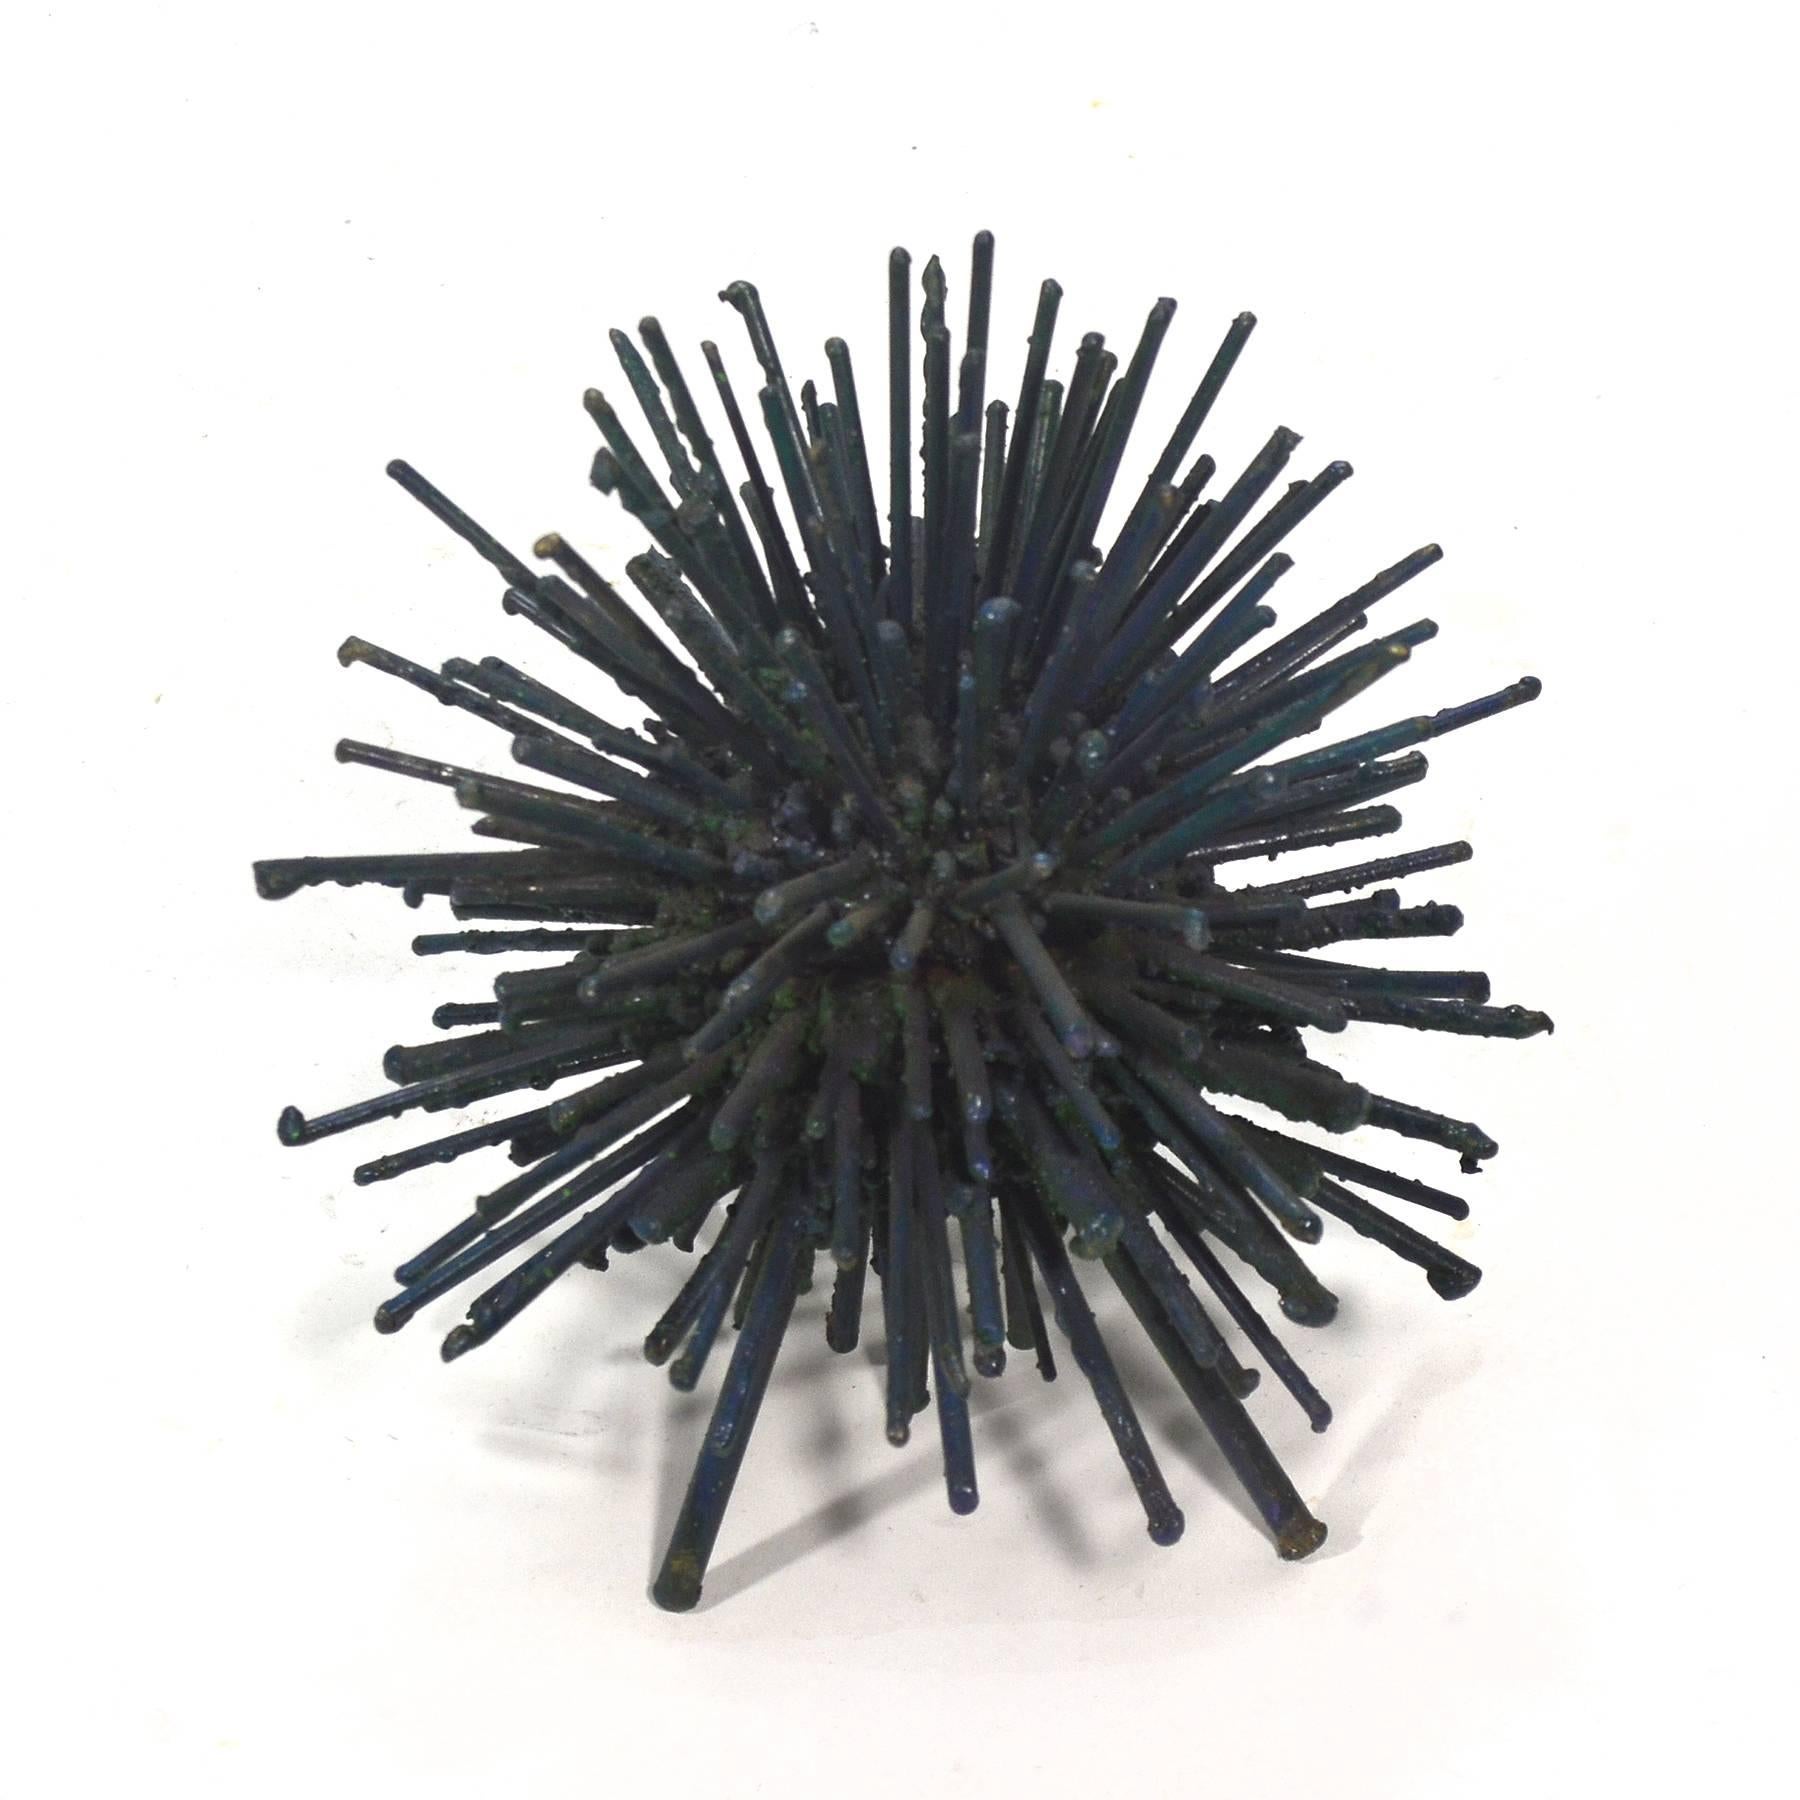 A wonderful and whimsical piece by sculptor James Bearden, this piece is composed of rods arranged in a dense burst reminiscent of the dandelion sculptures by Harry Bertoia. The sculpture has a wonderful composition, great texture, and subtle color,